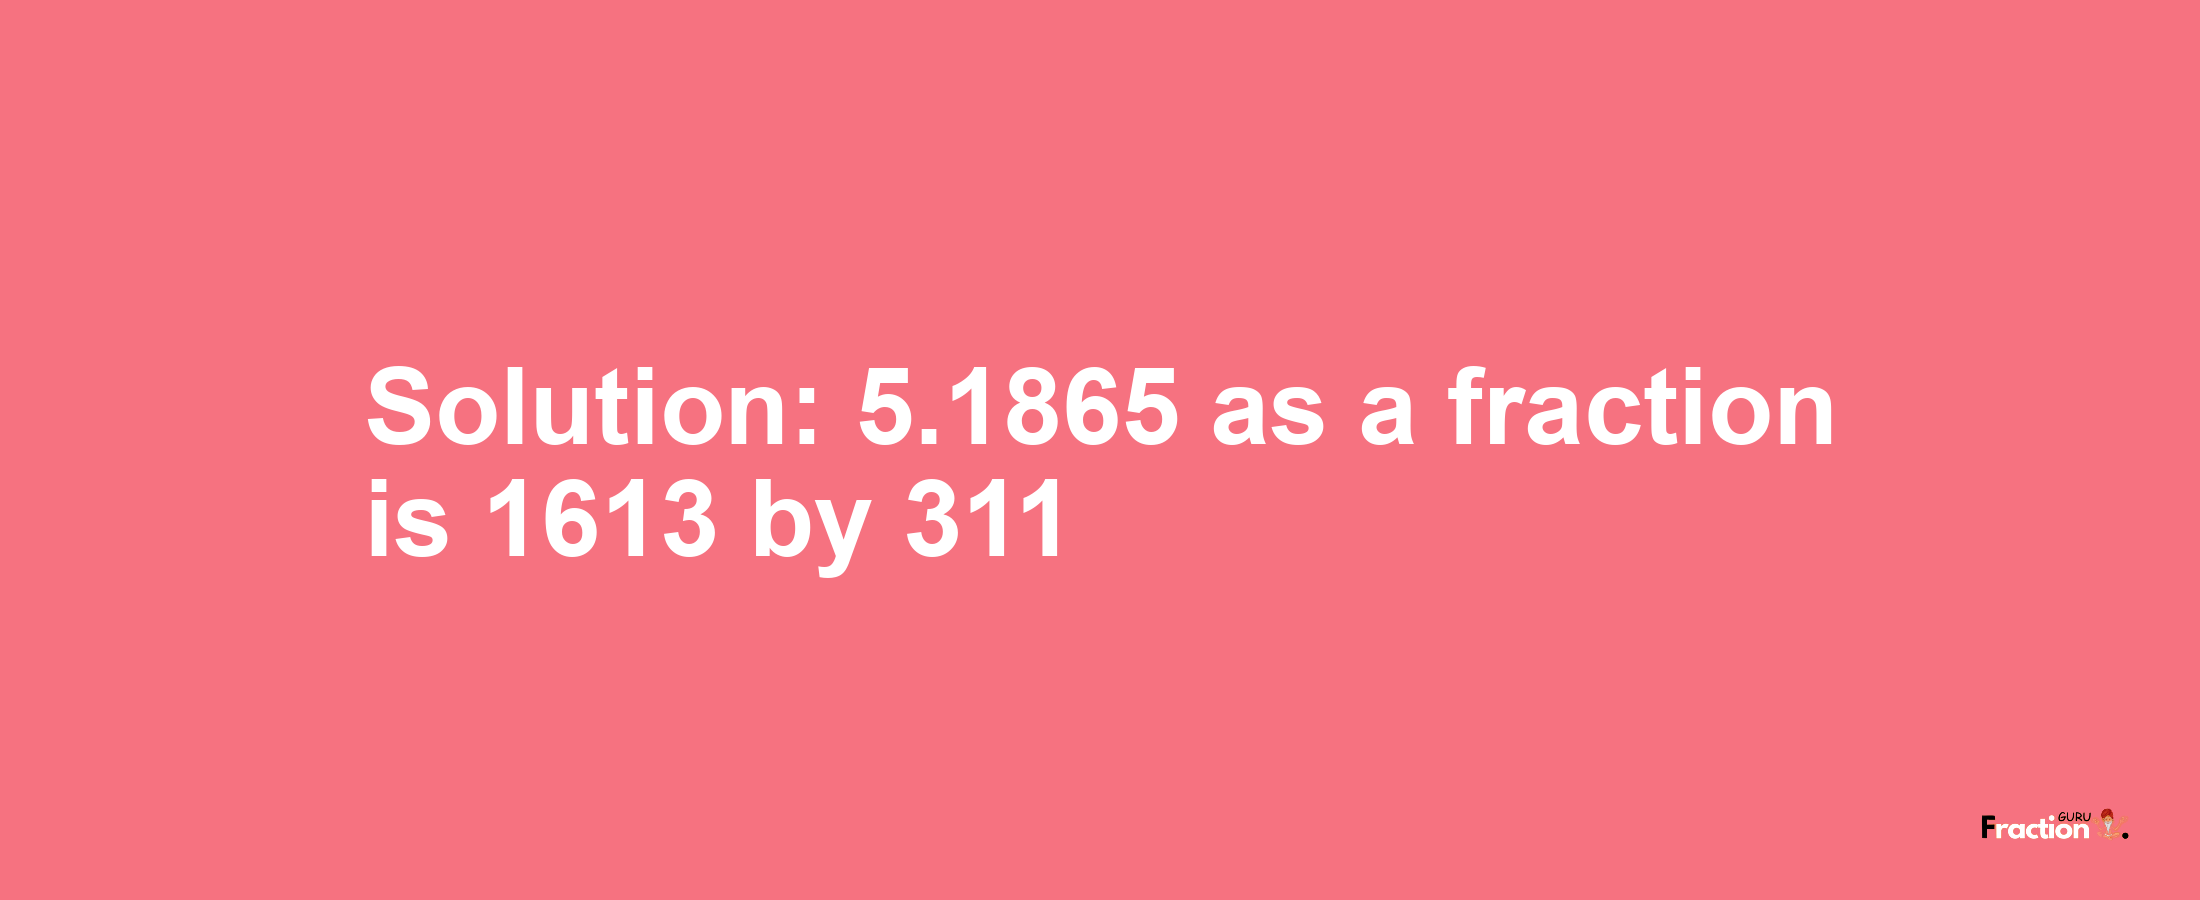 Solution:5.1865 as a fraction is 1613/311